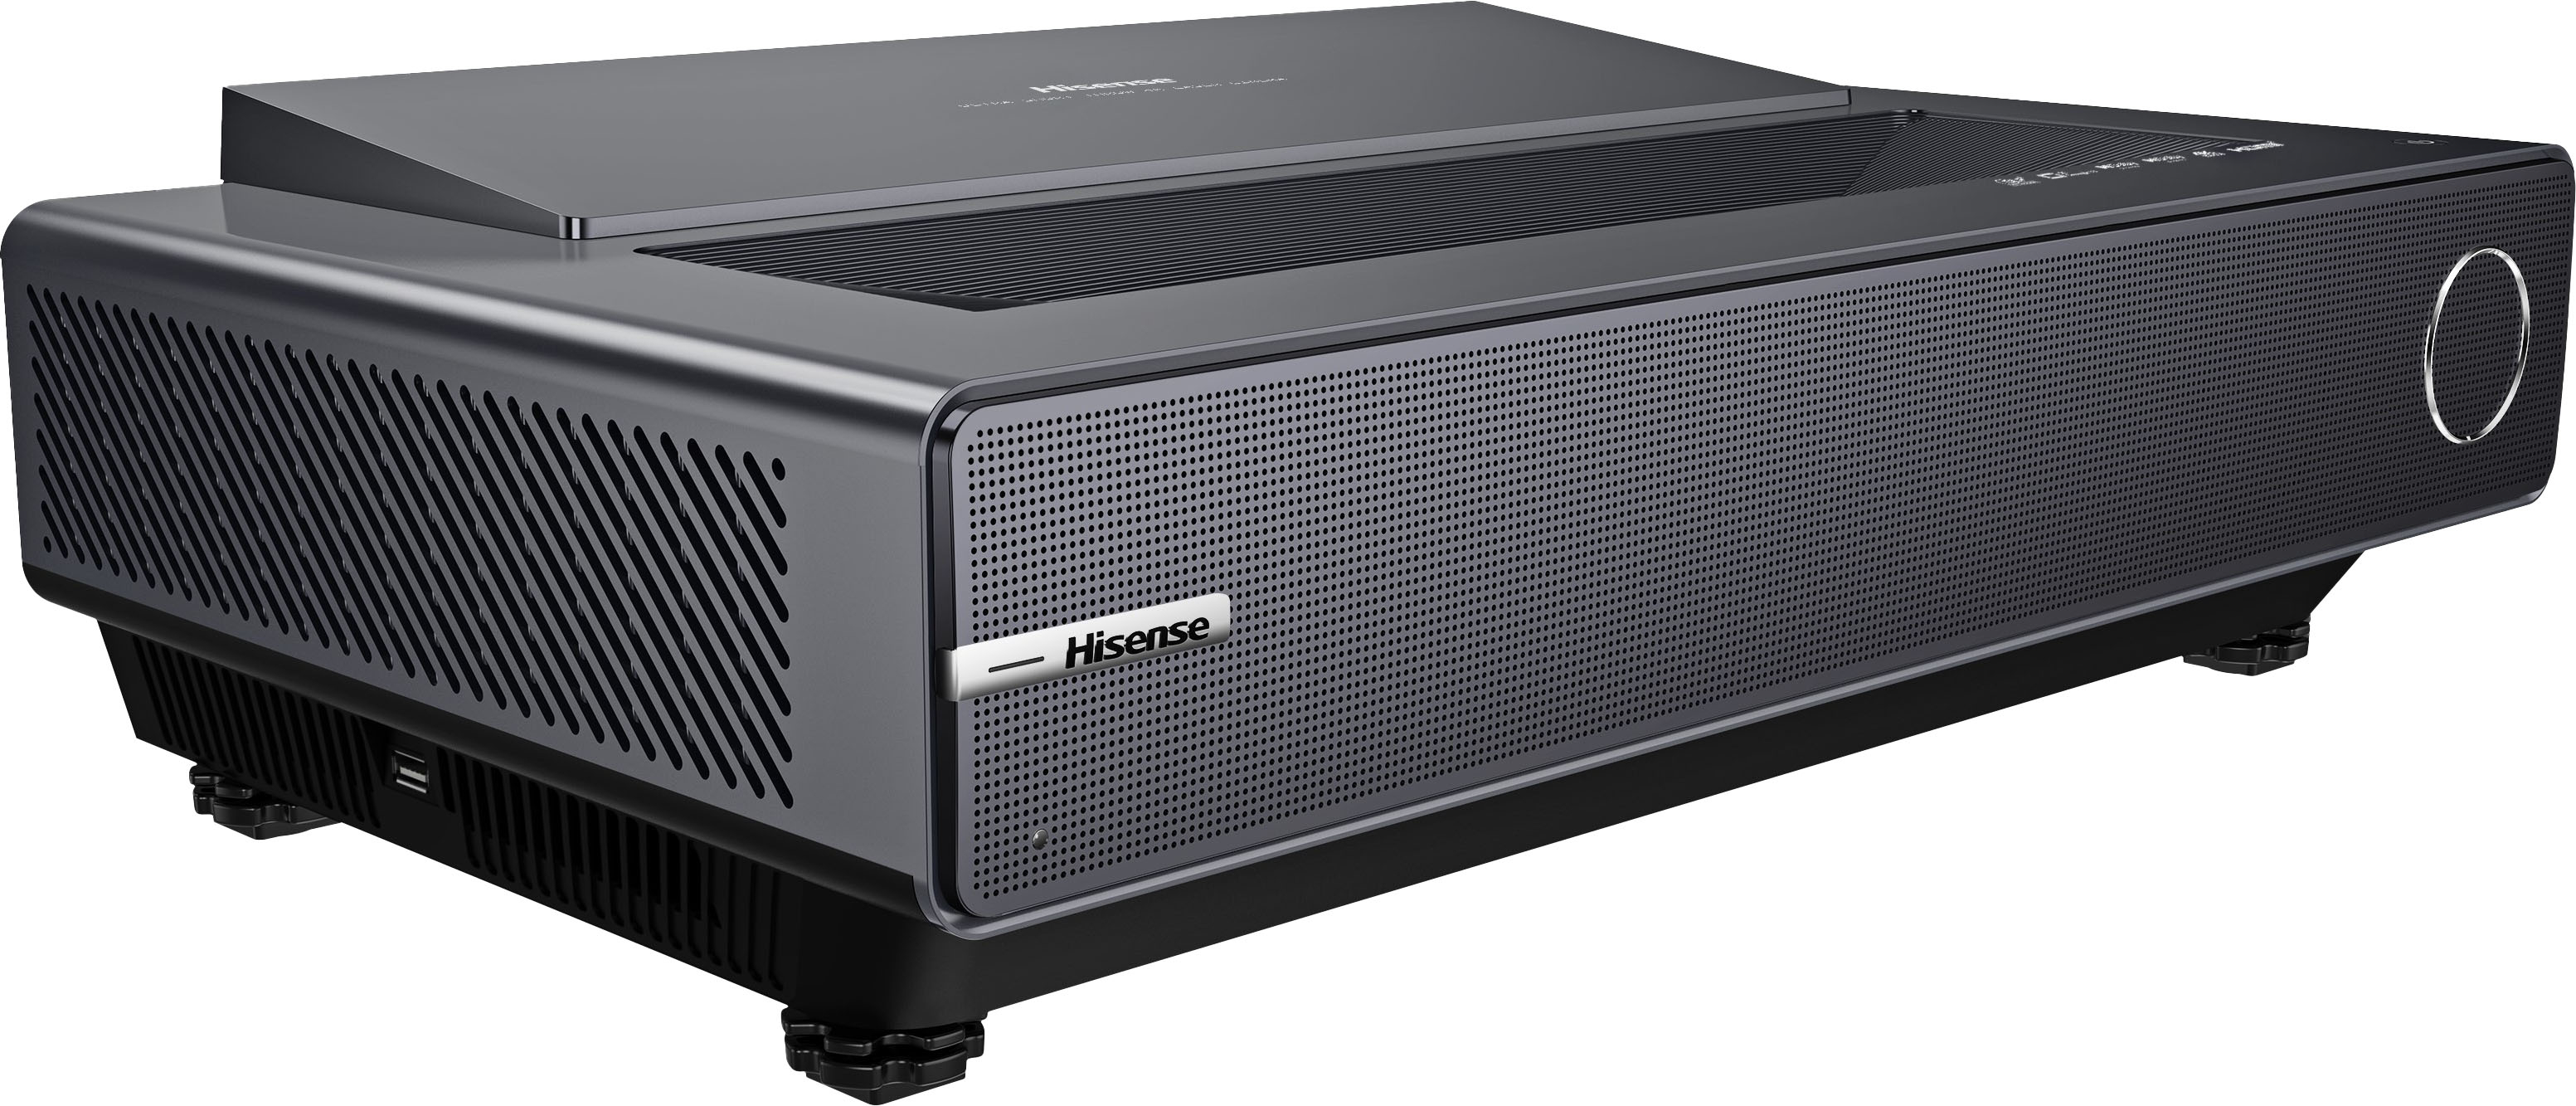 Hisense debuts portable laser projector with 150-inch image